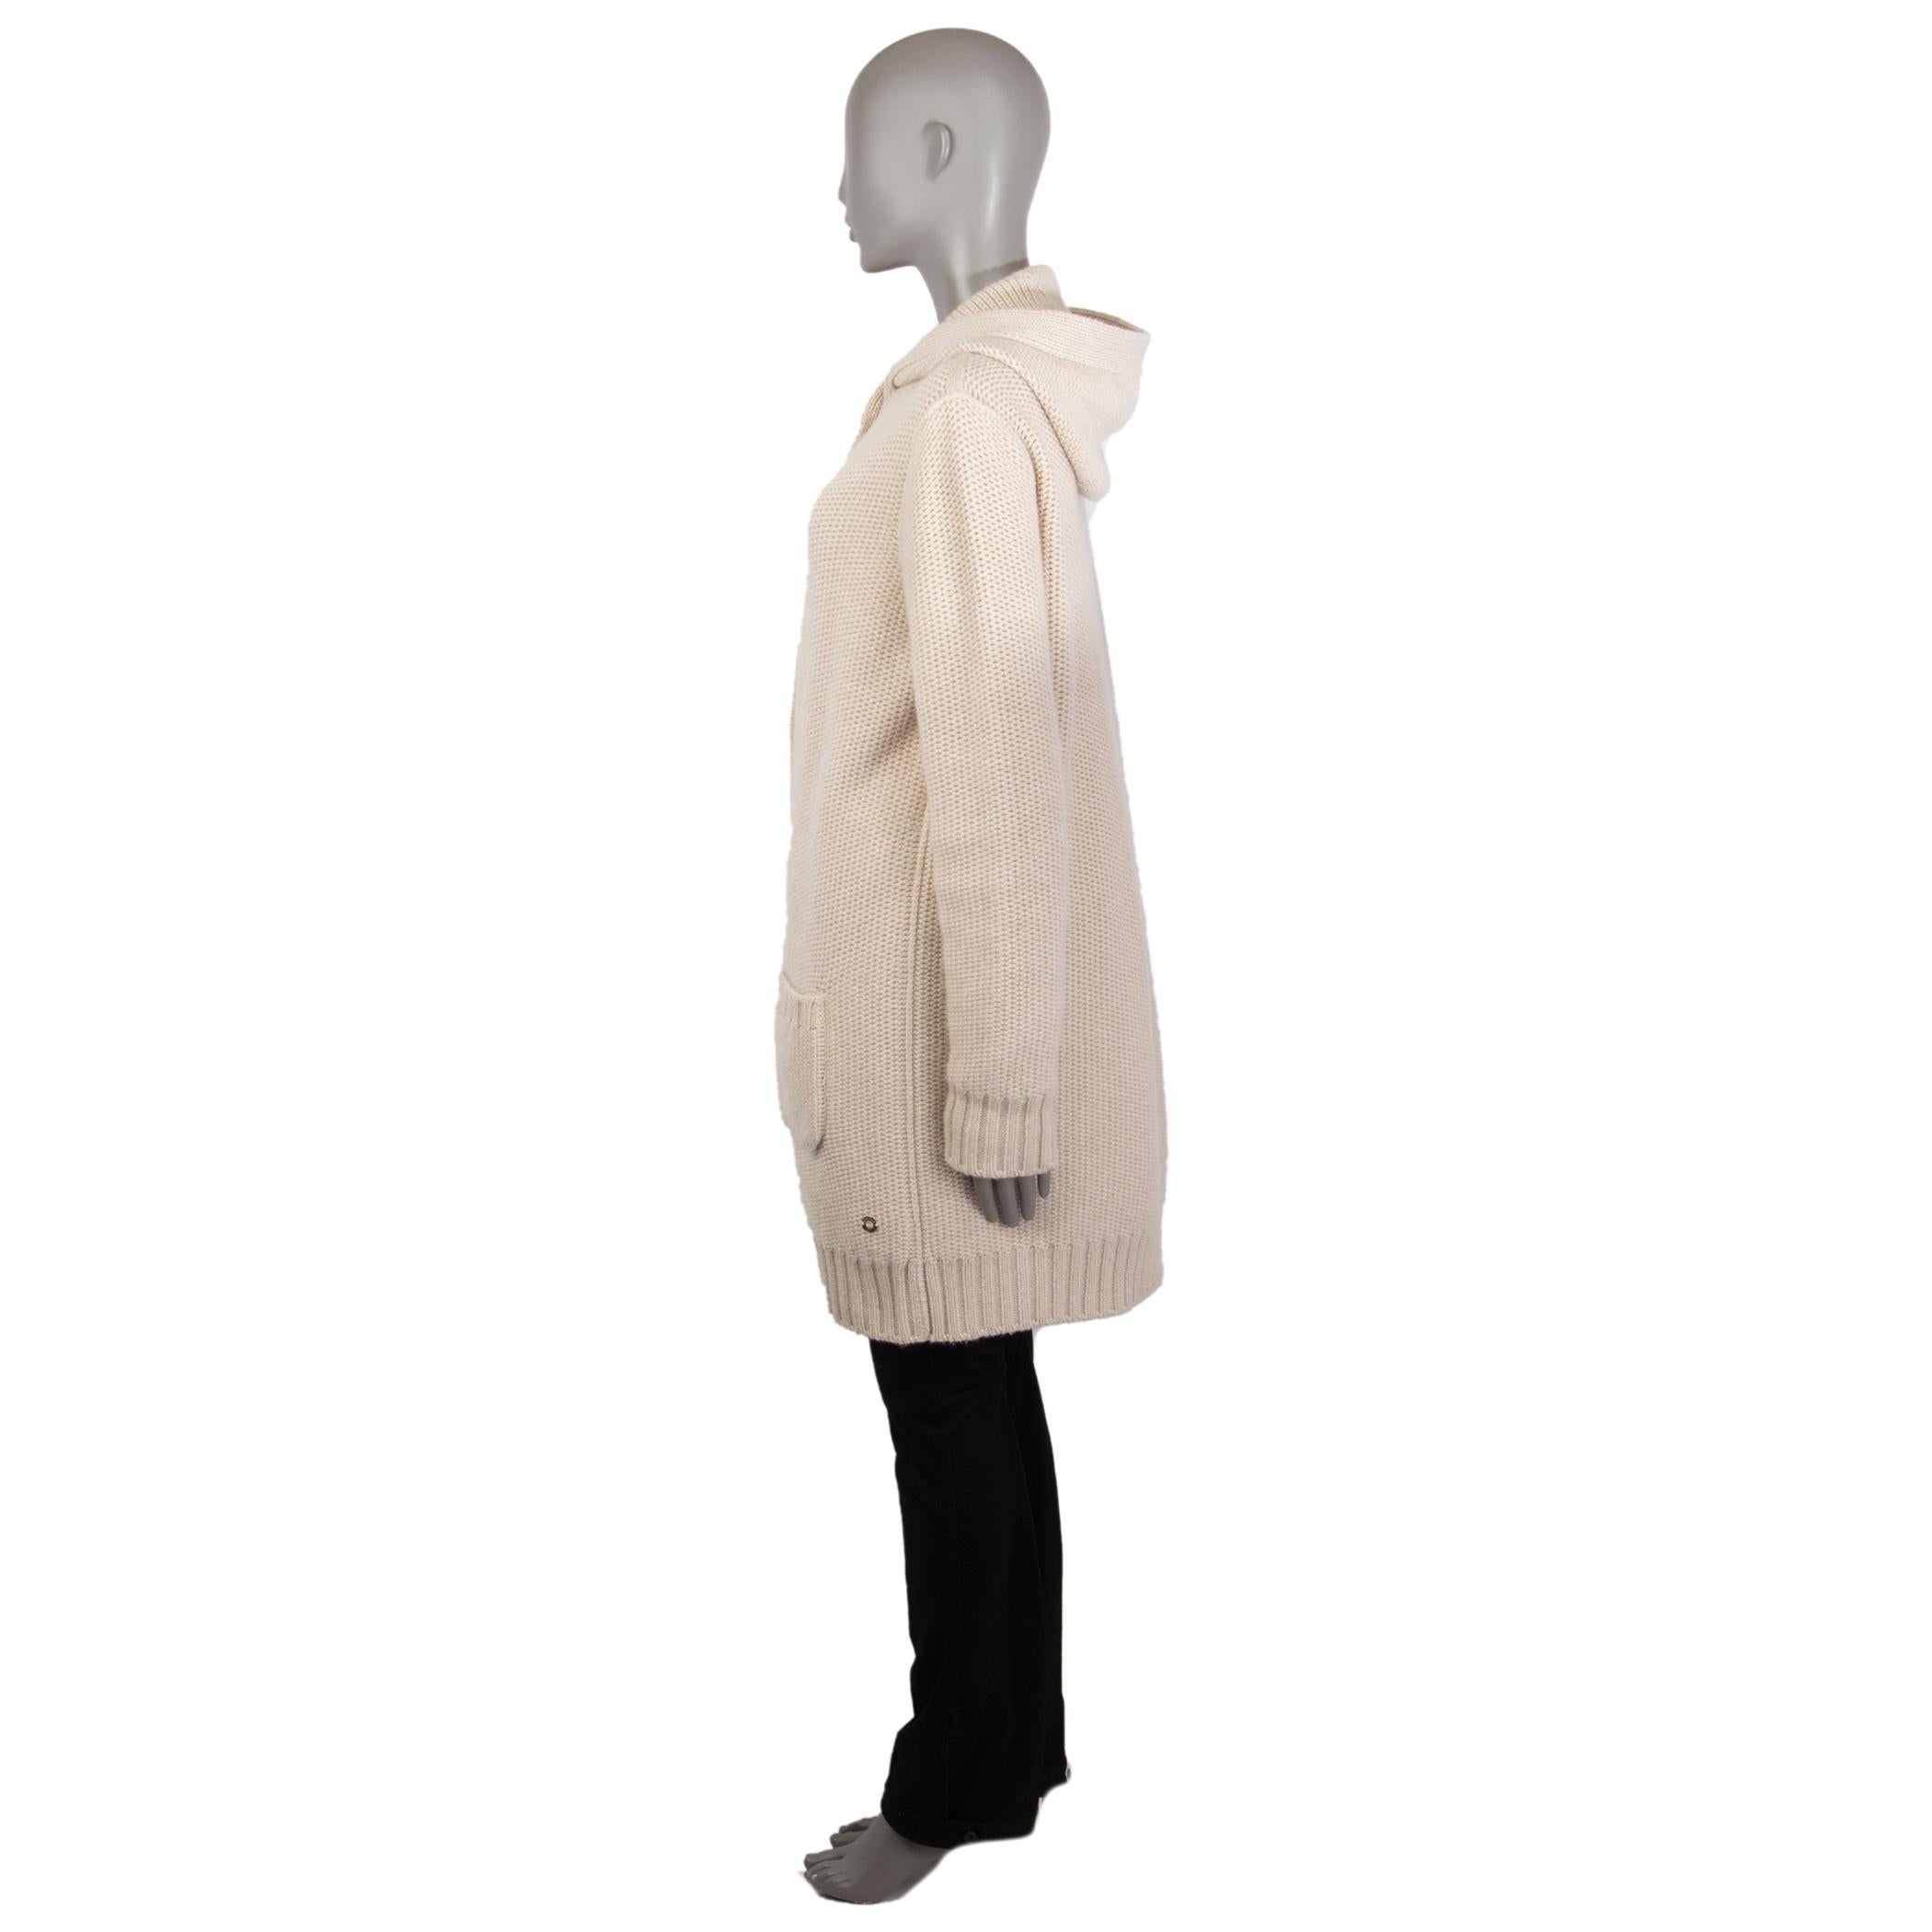 Loro Piana reversible hooded knit coat in sand cashmere (100%). With two patch pockets on the front and two more on the reverse side. Closes with off-white brand buttons on the front. Unlined. Has been worn and is in excellent condition.

Please